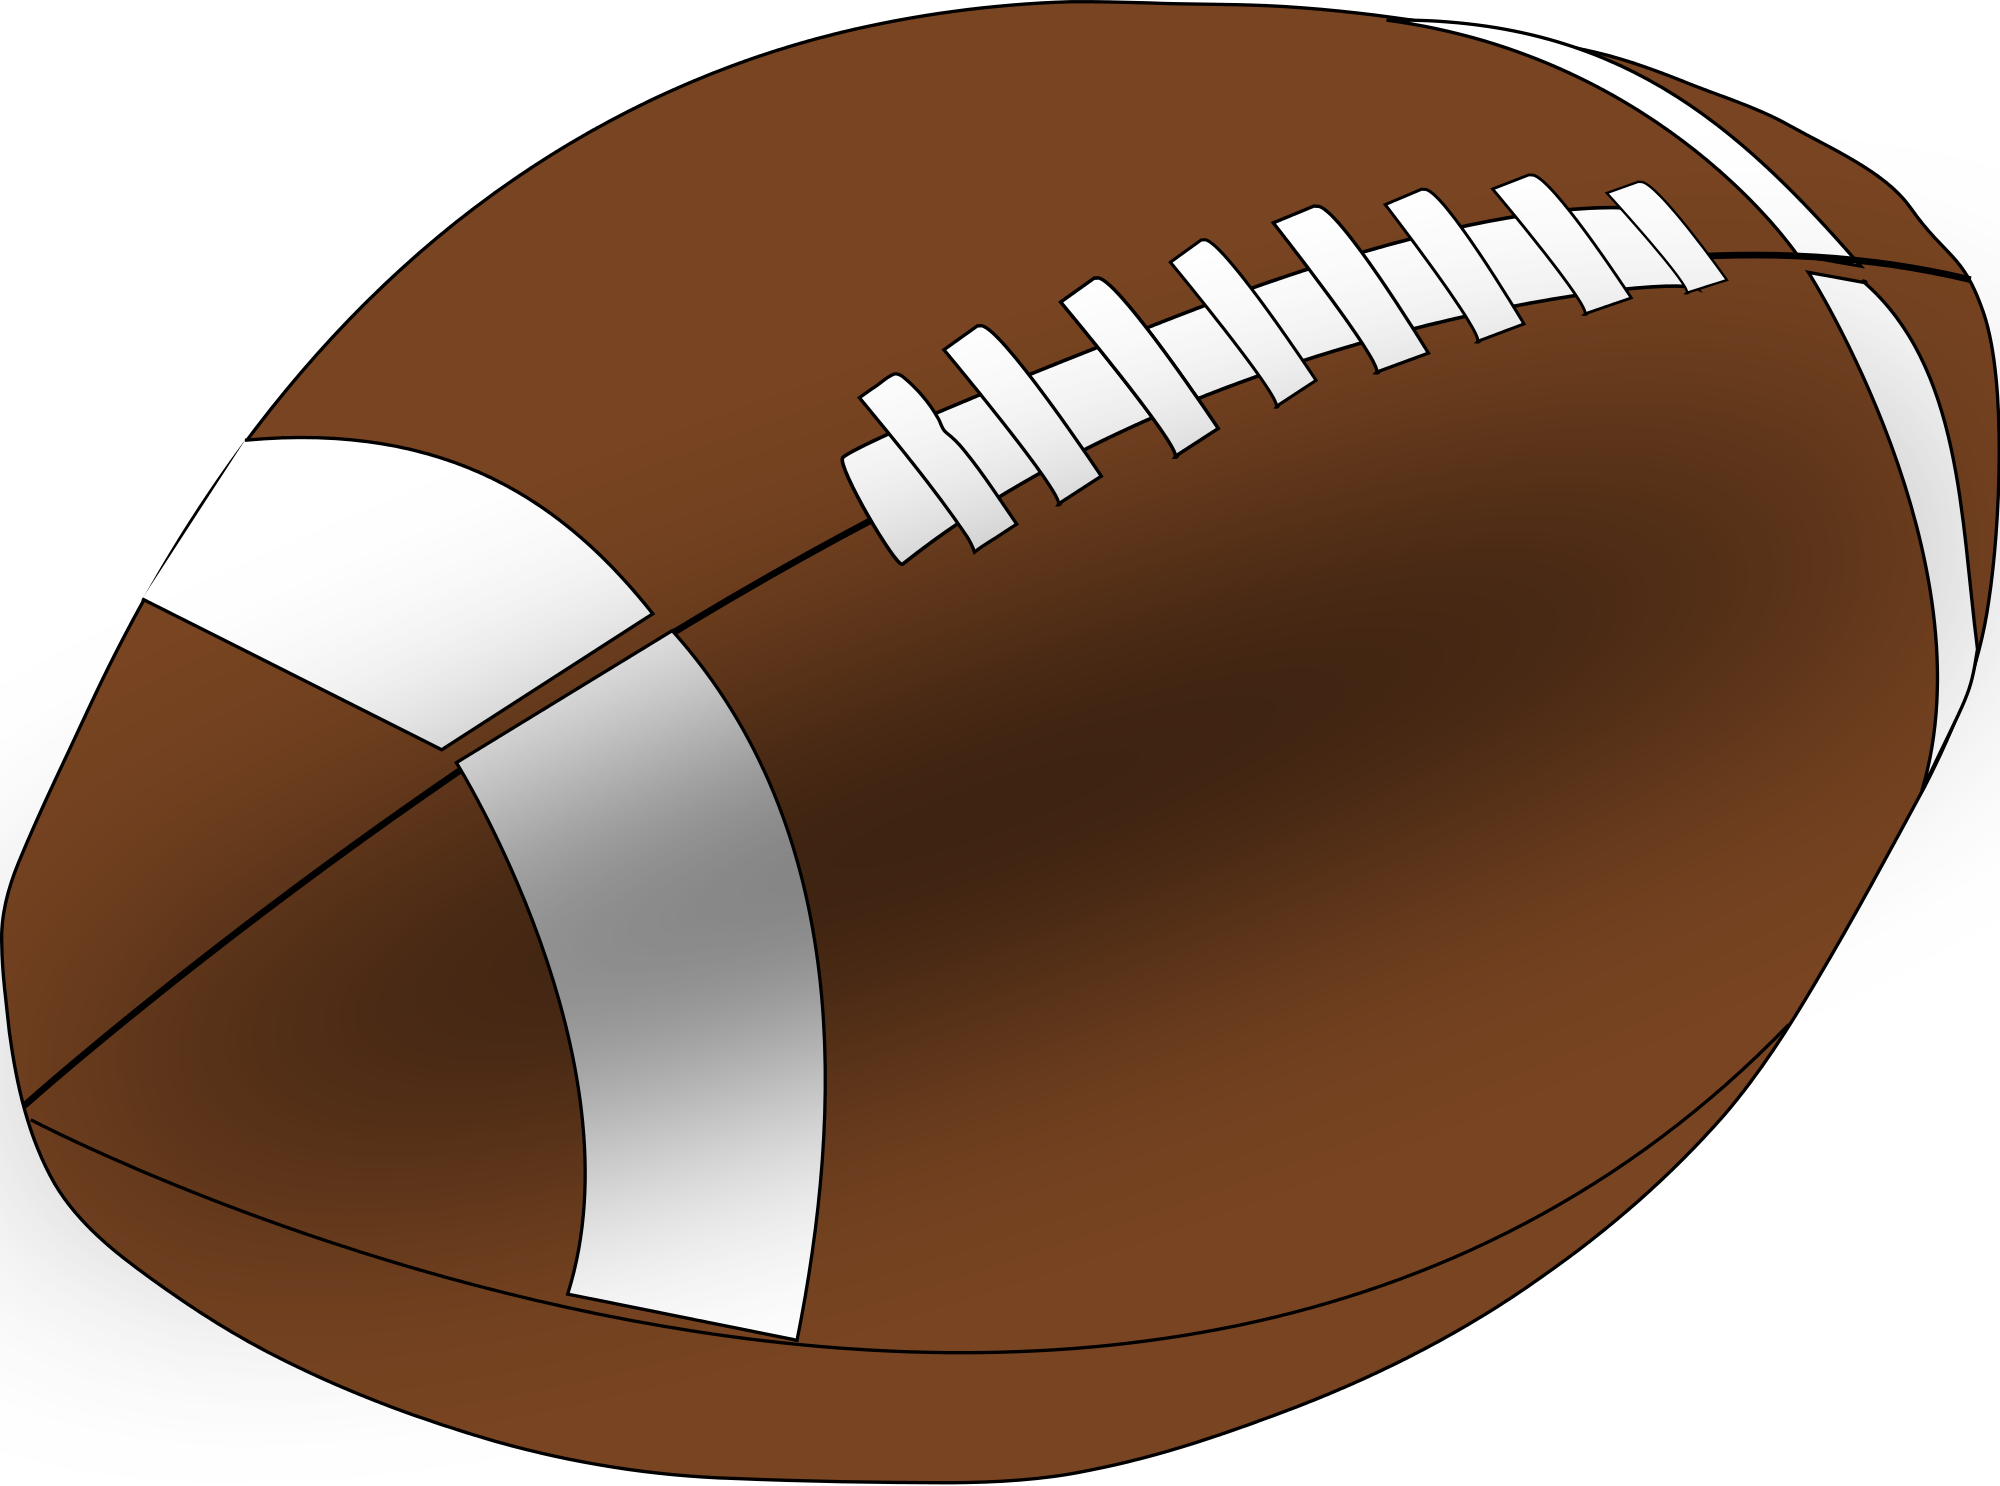 American football PNG images Download 